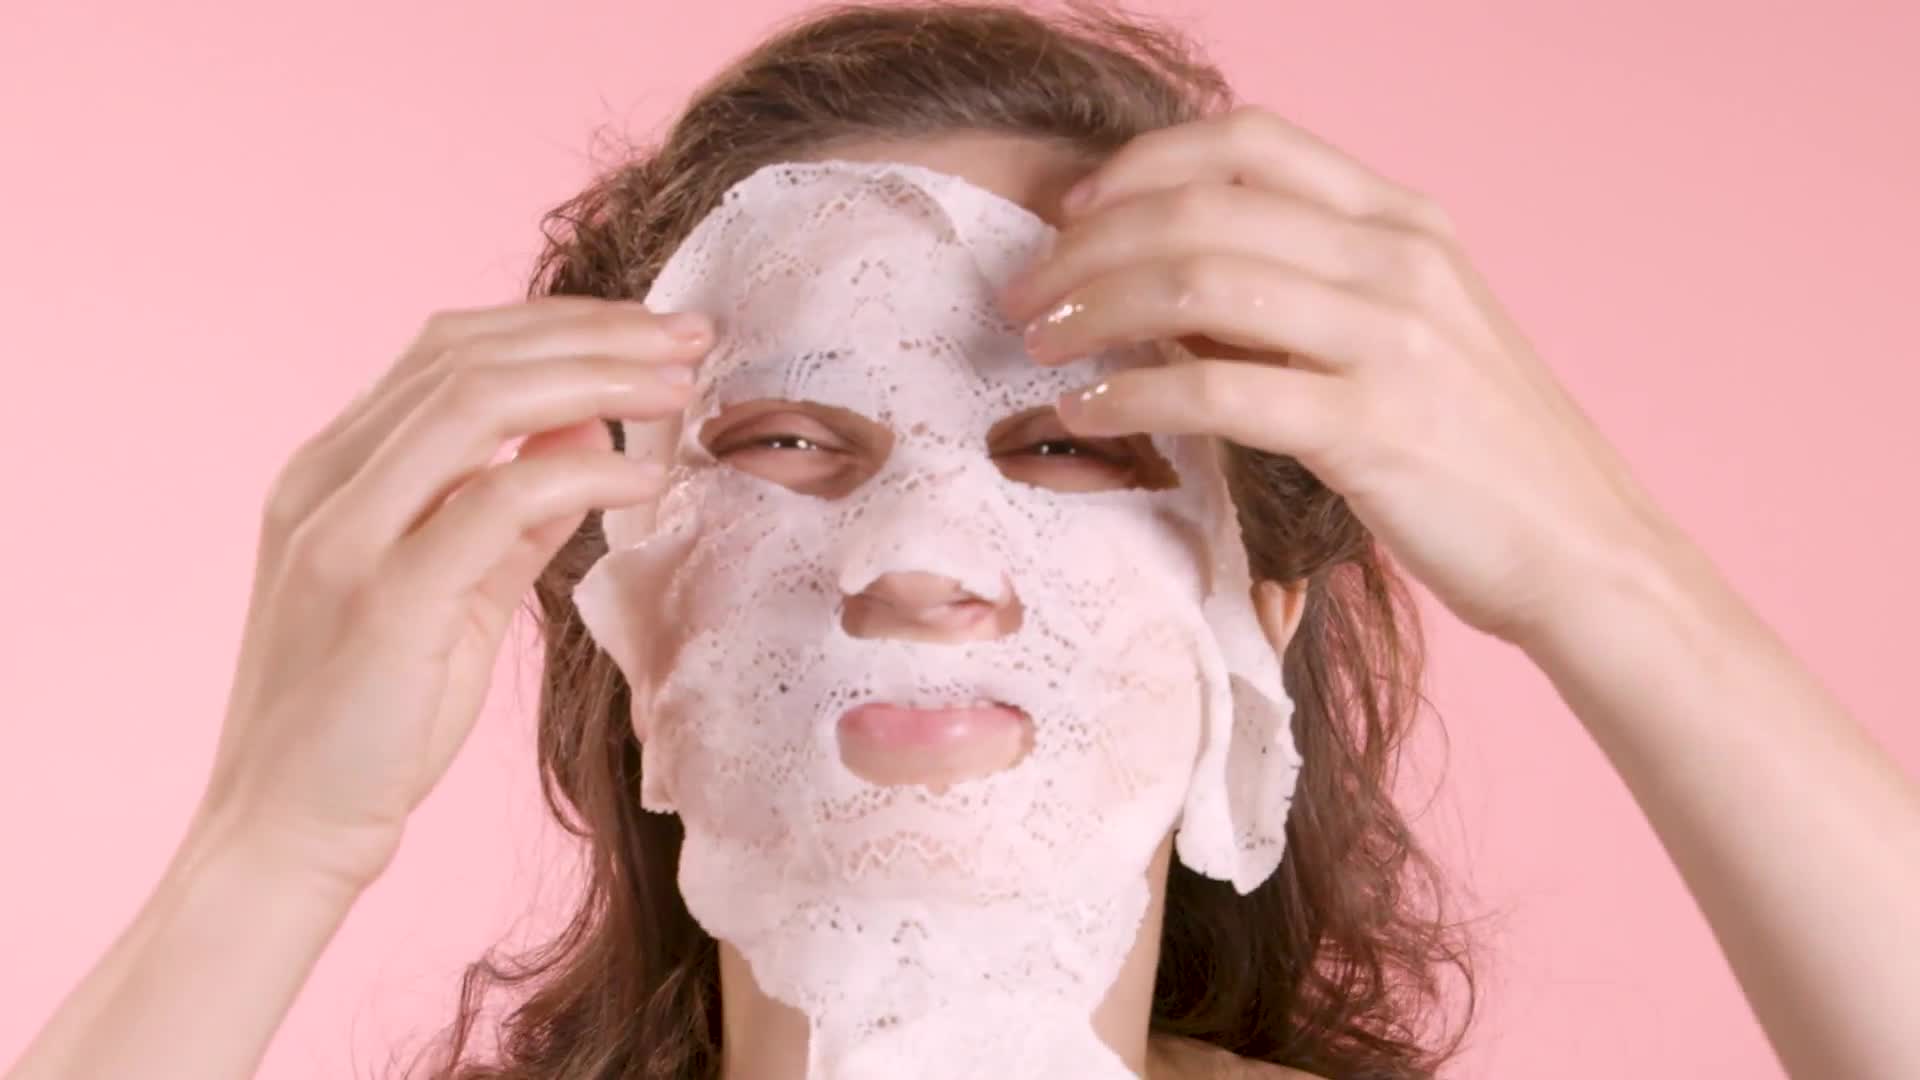 Watch We Tried This Lifting Sheet Mask Made of Lace, Product Reviews